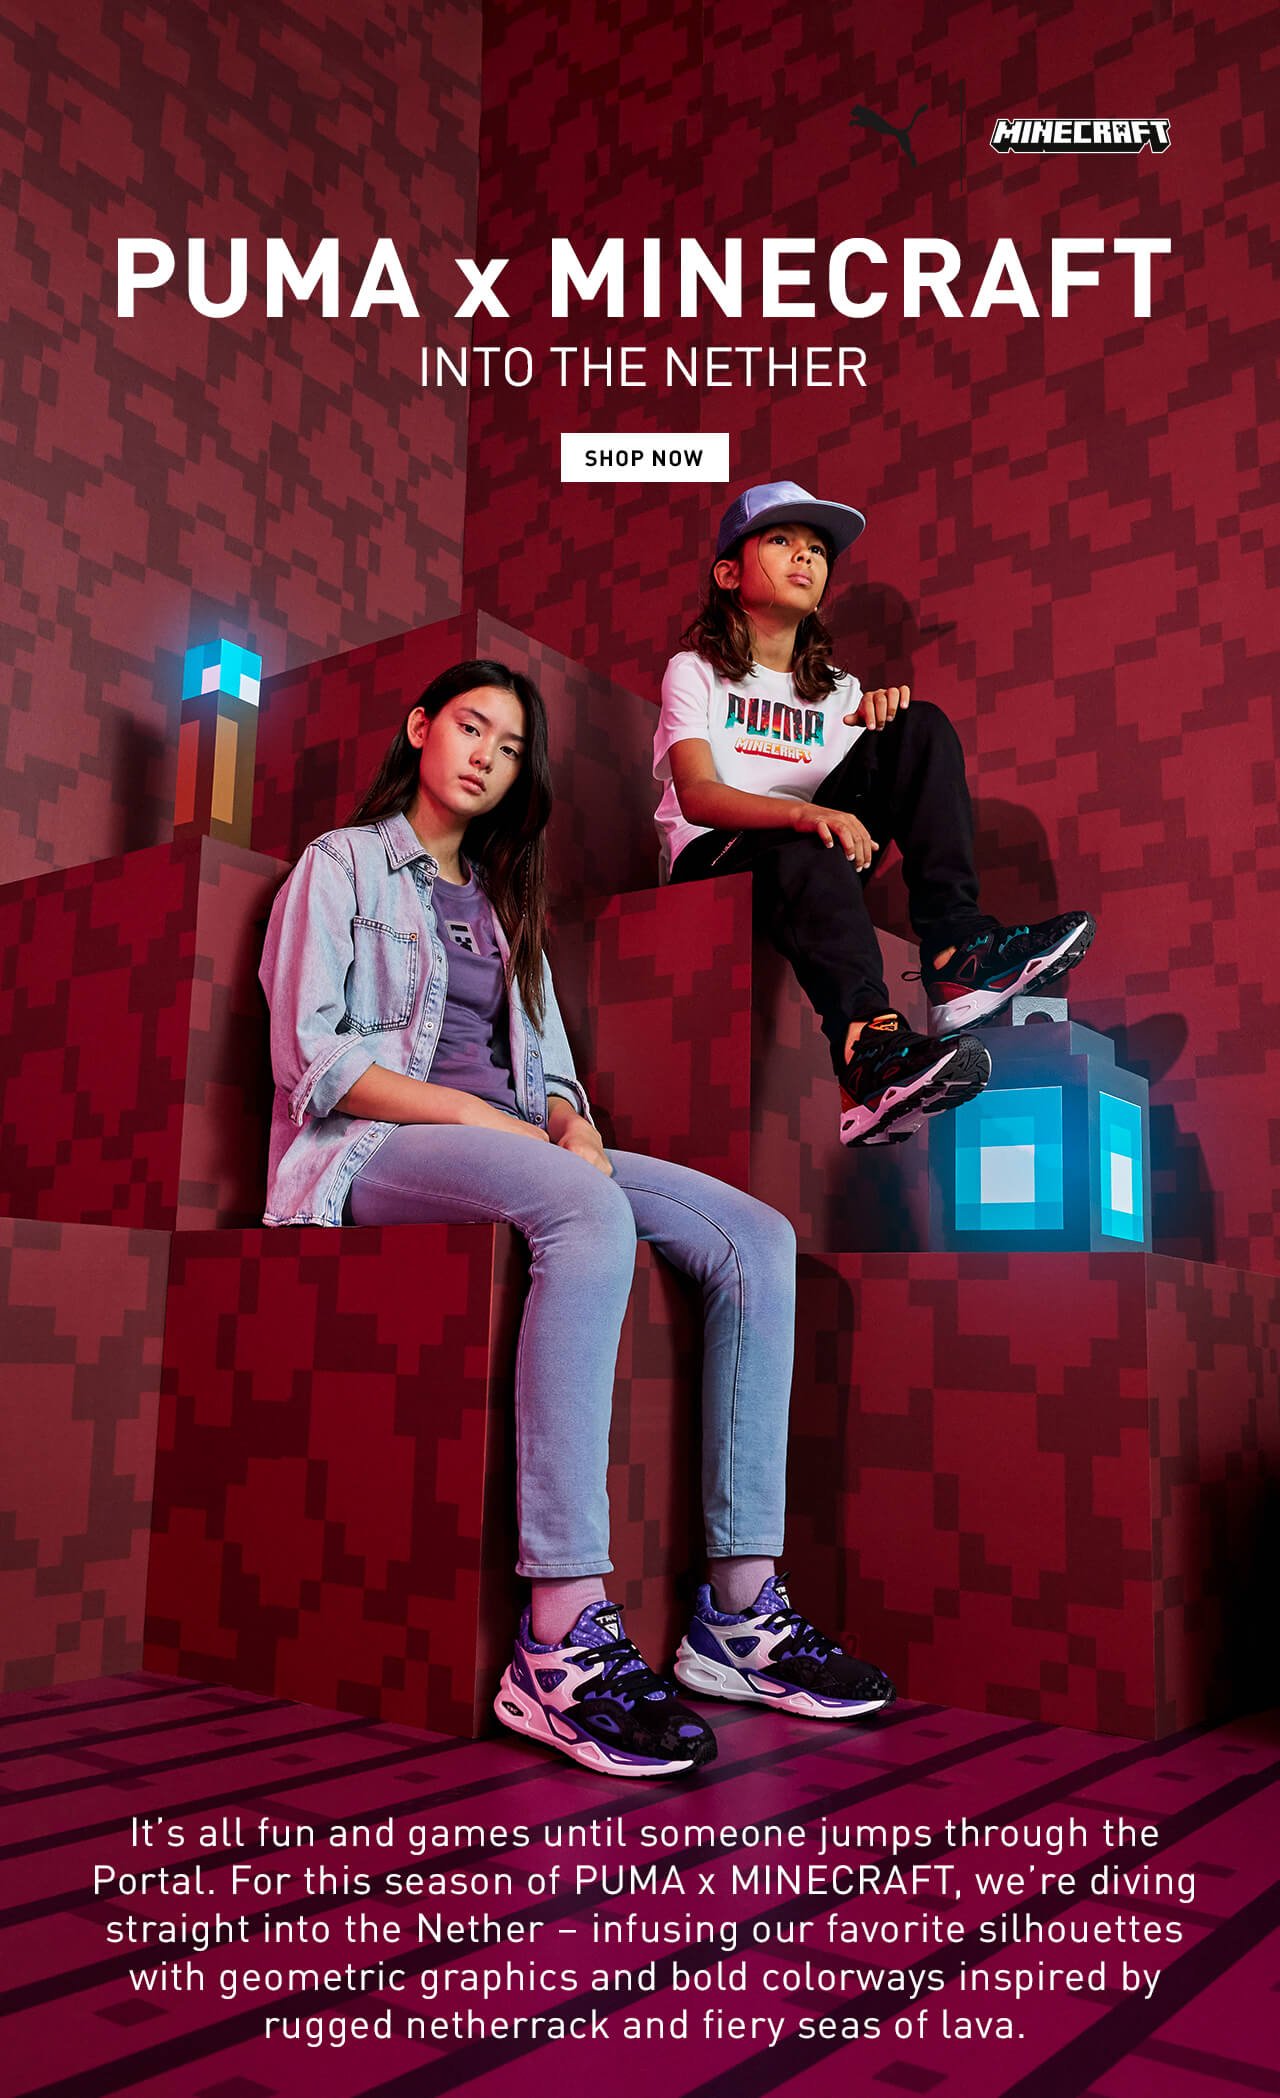 PUMA x MINECRAFT | INTO THE NETHER | SHOP NOW | It’s all fun and games until someone jumps through the Portal. For this season of PUMA x MINECRAFT, we’re diving straight into the Nether – infusing our favorite silhouettes with geometric graphics and bold colorways inspired by rugged netherrack and fiery seas of lava.